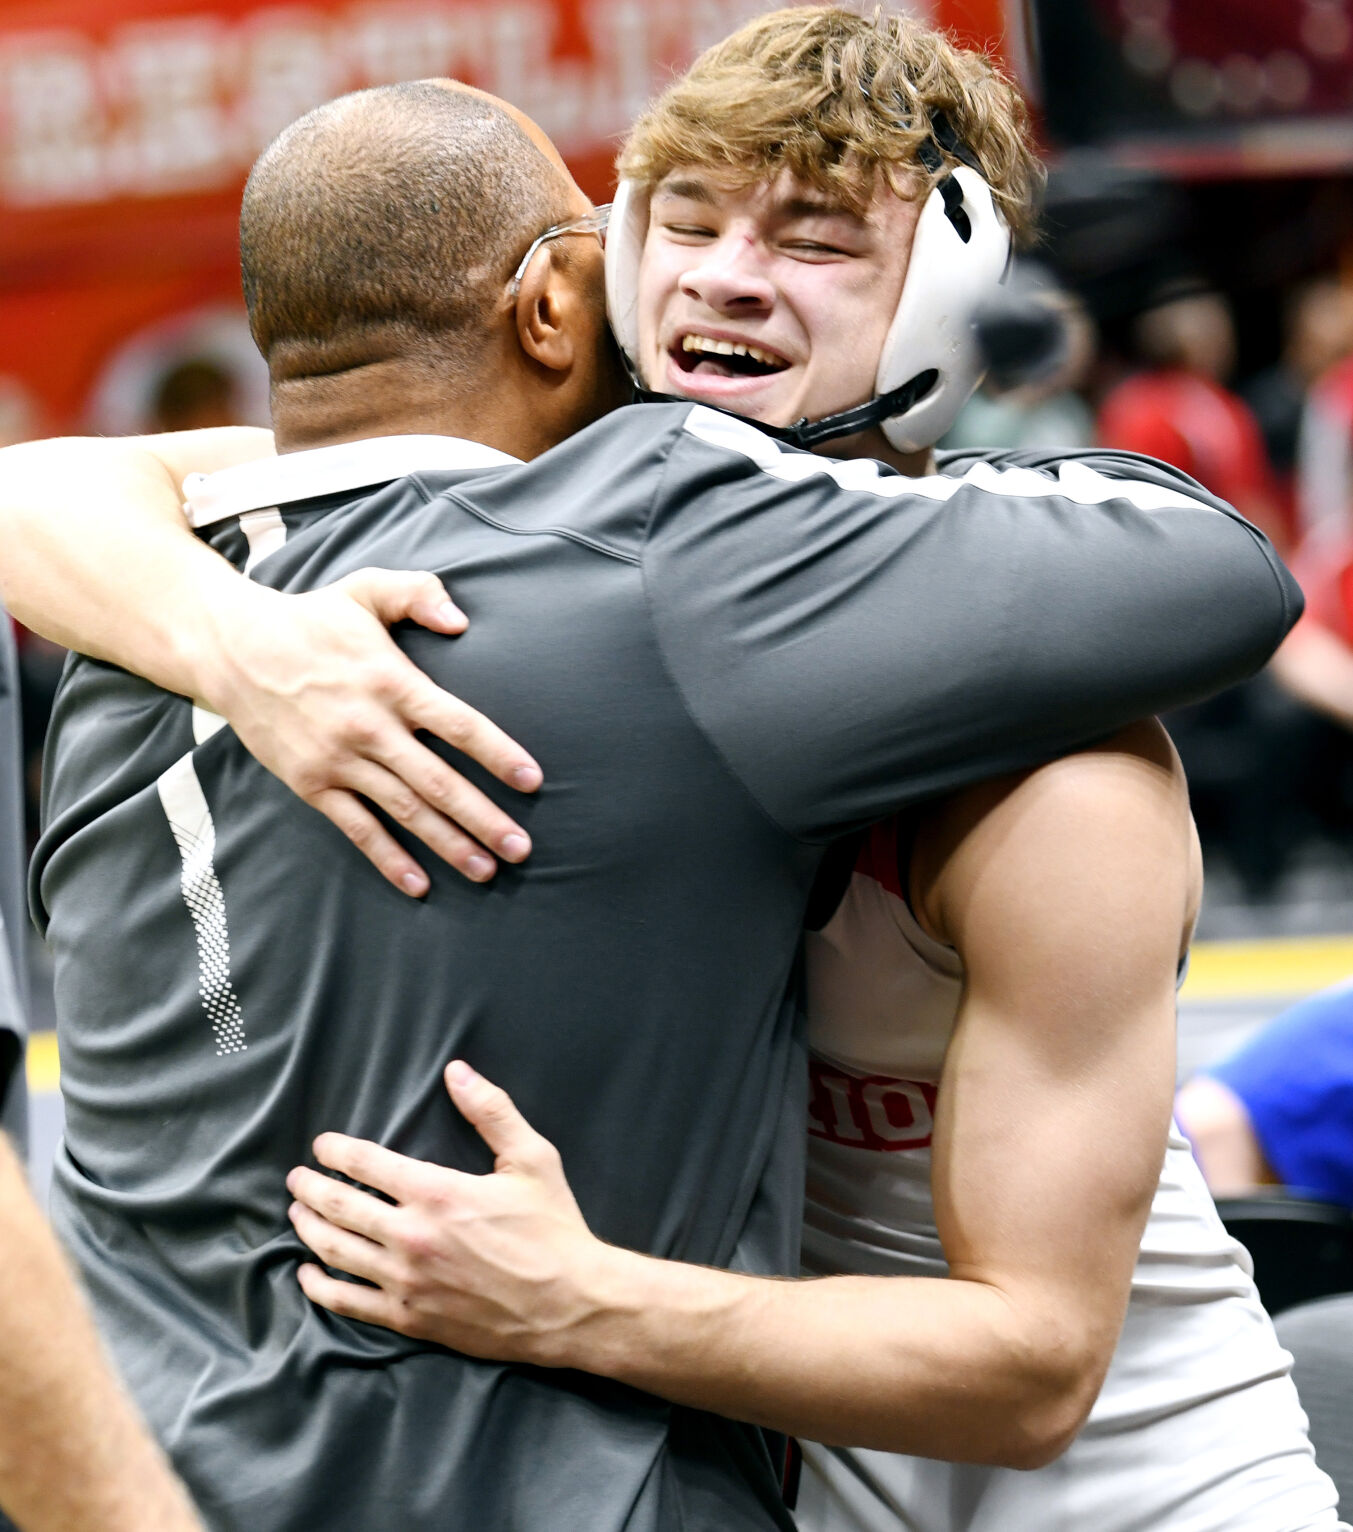 Kyle Vencill: From Late Starter to Victorious Wrestler in Ohio’s State Tournaments